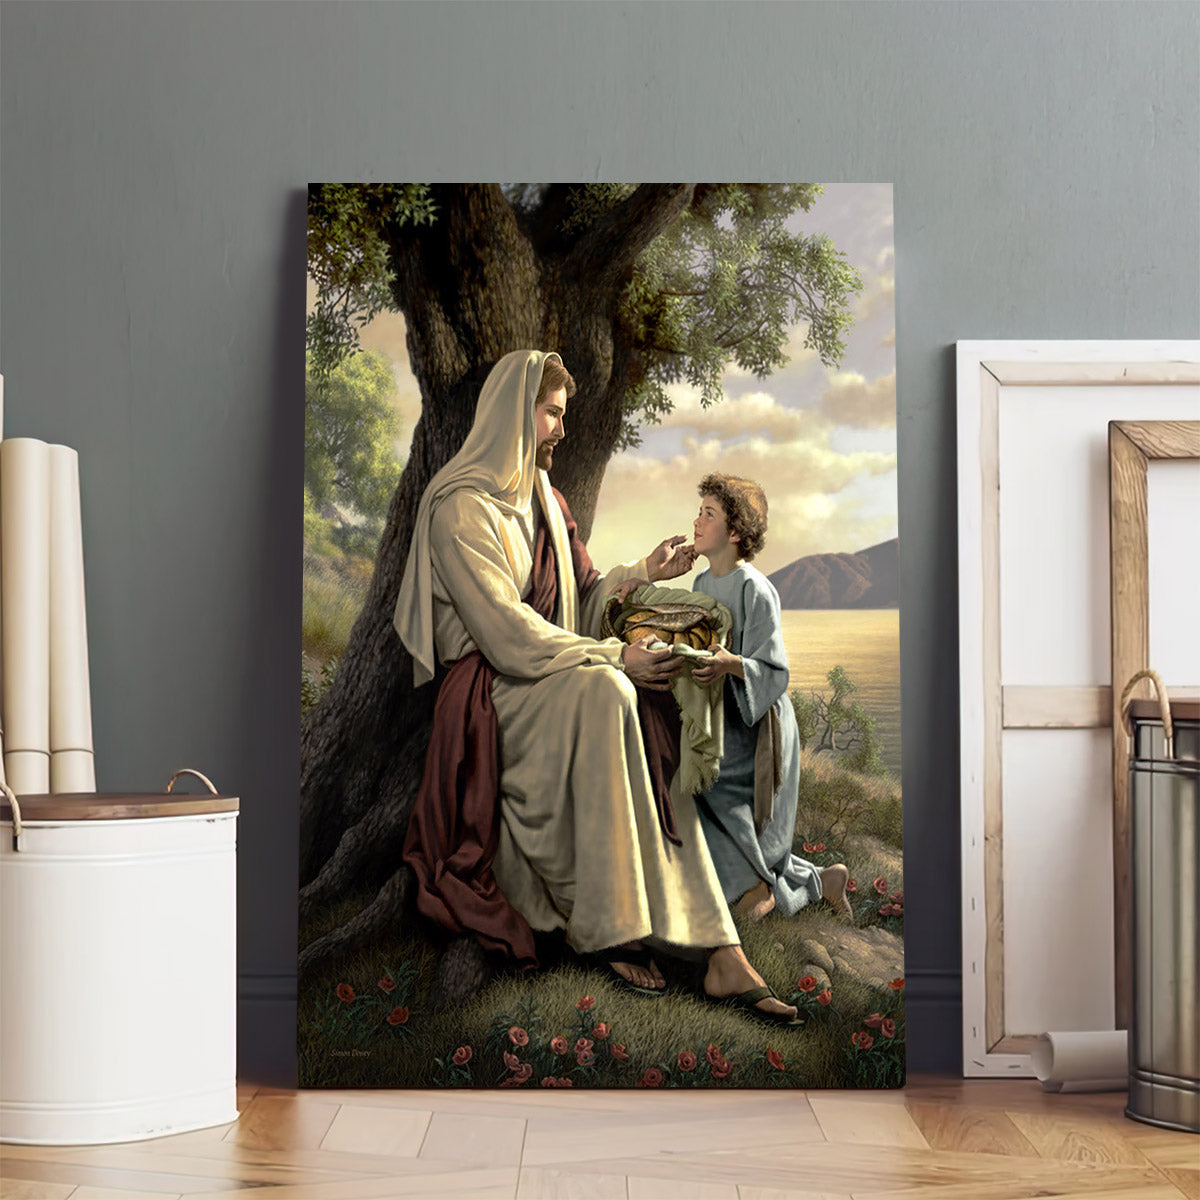 He Will Make It More Canvas Wall Art - Jesus Canvas Pictures - Christian Canvas Wall Art